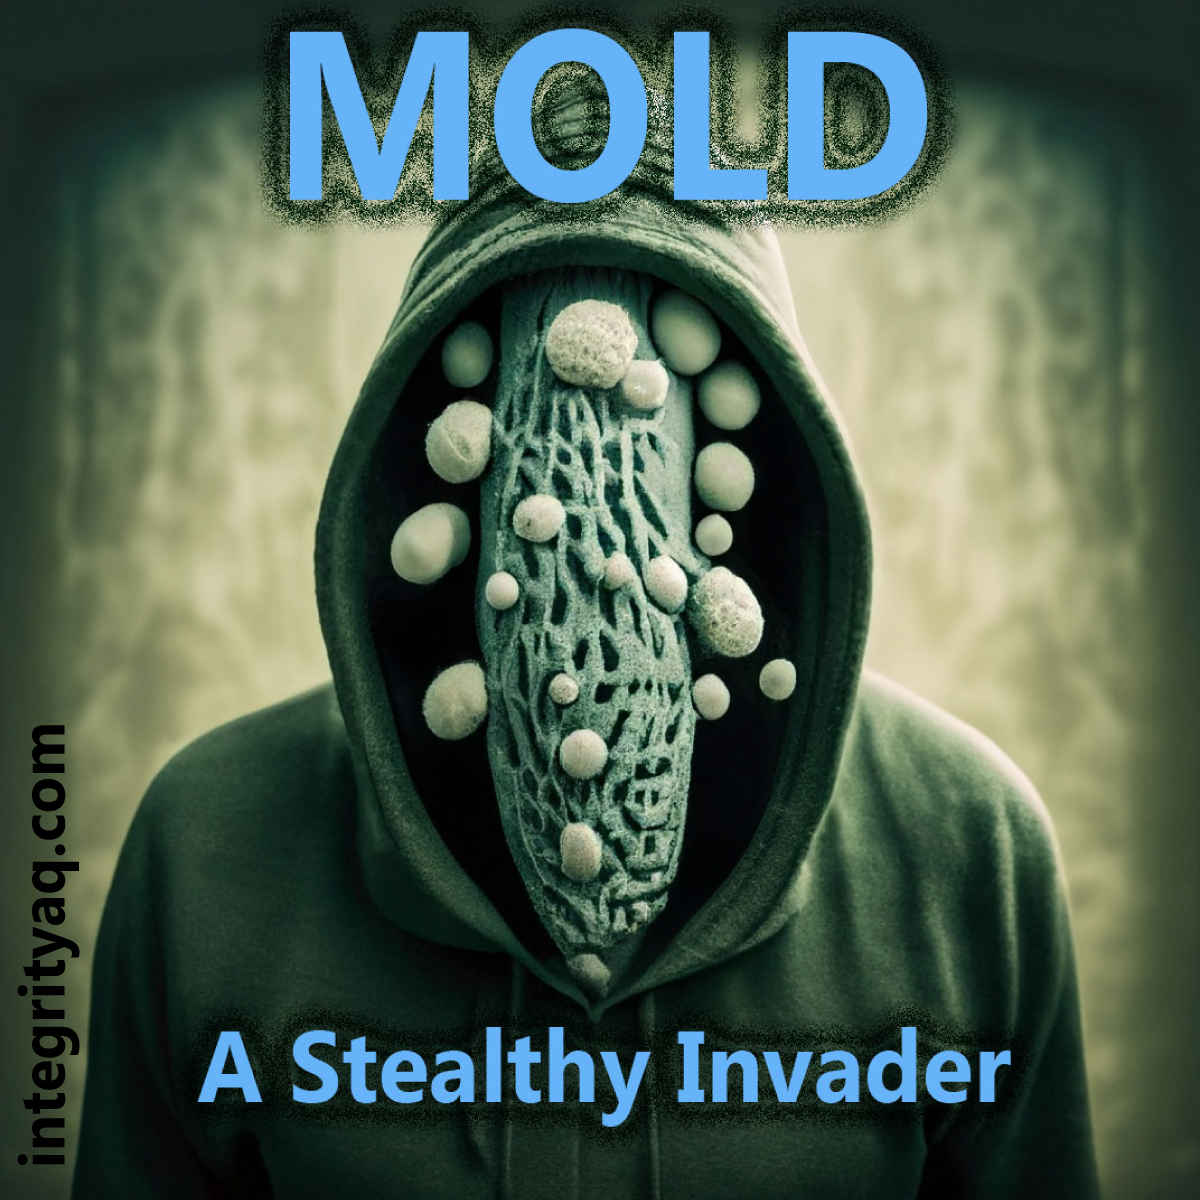 Finding Mold: A Stealthy Invader